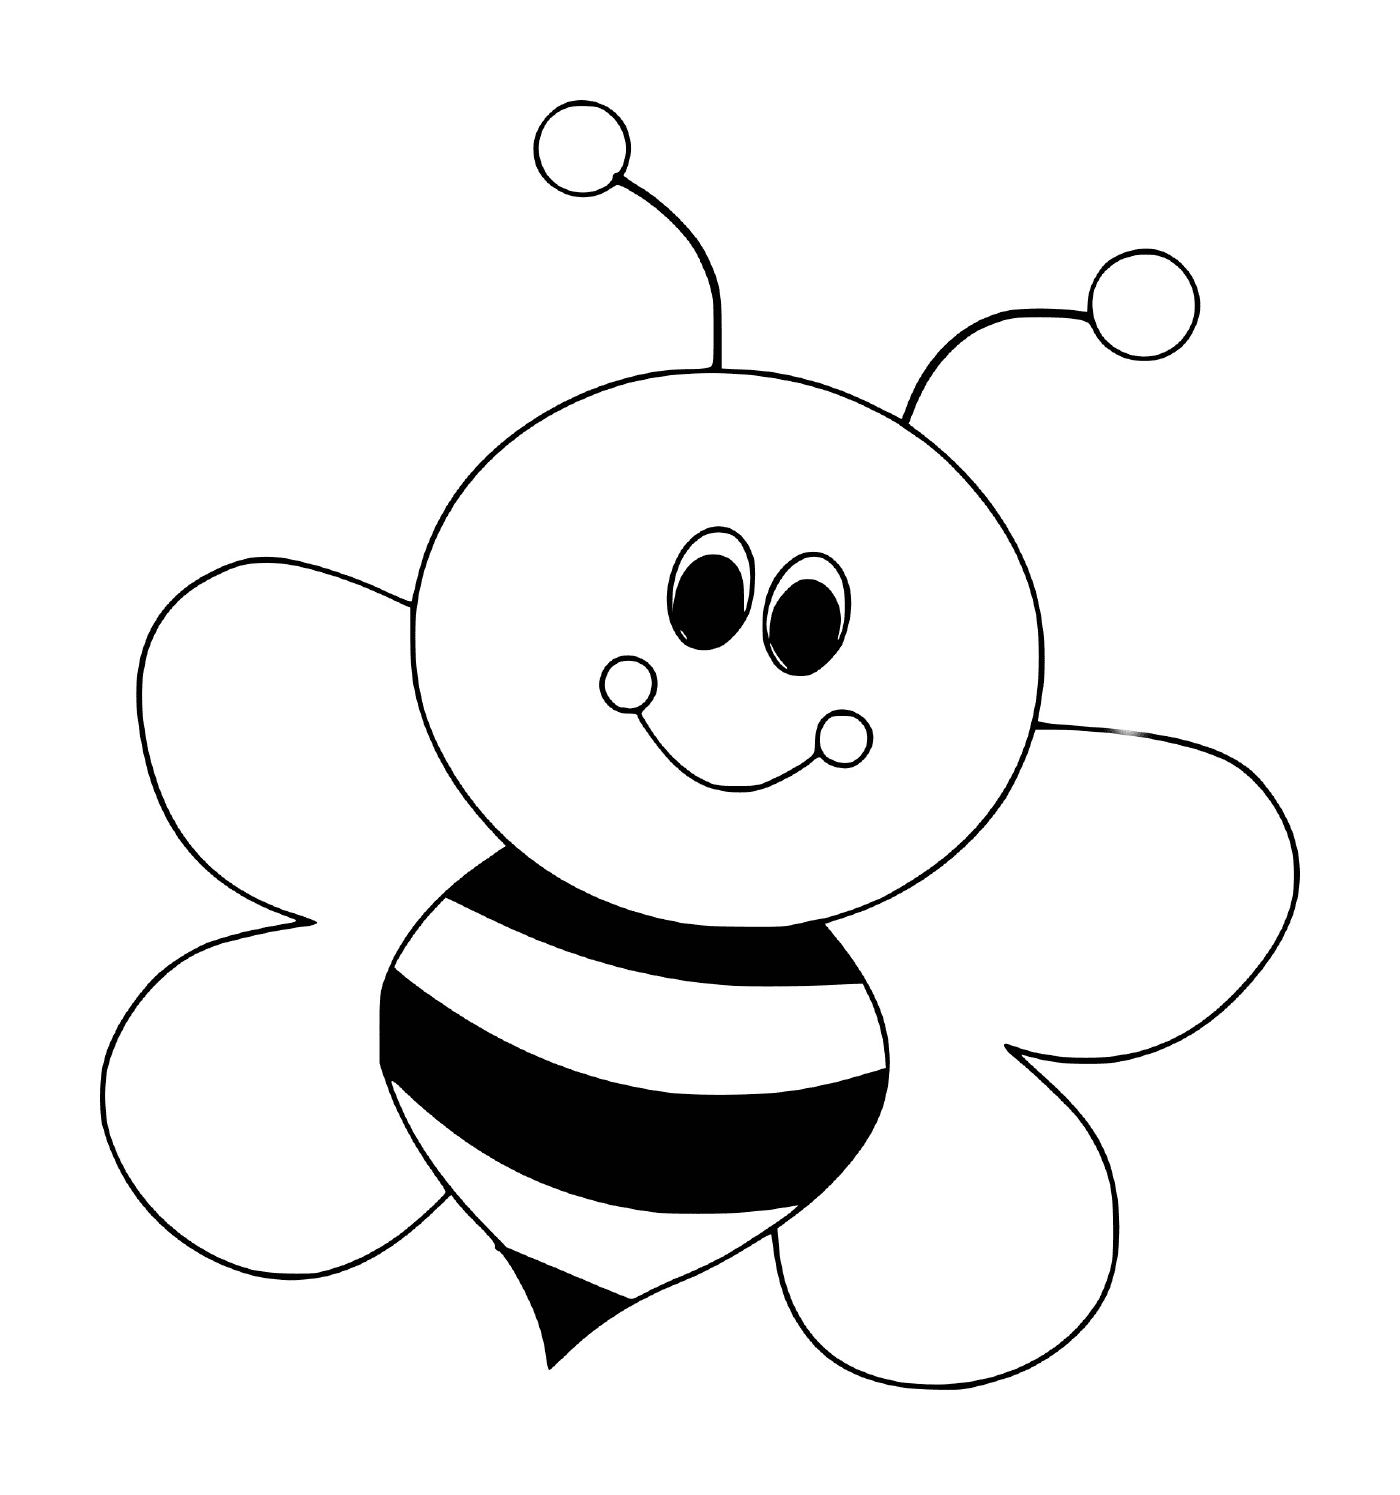  Adorable smiling bee 